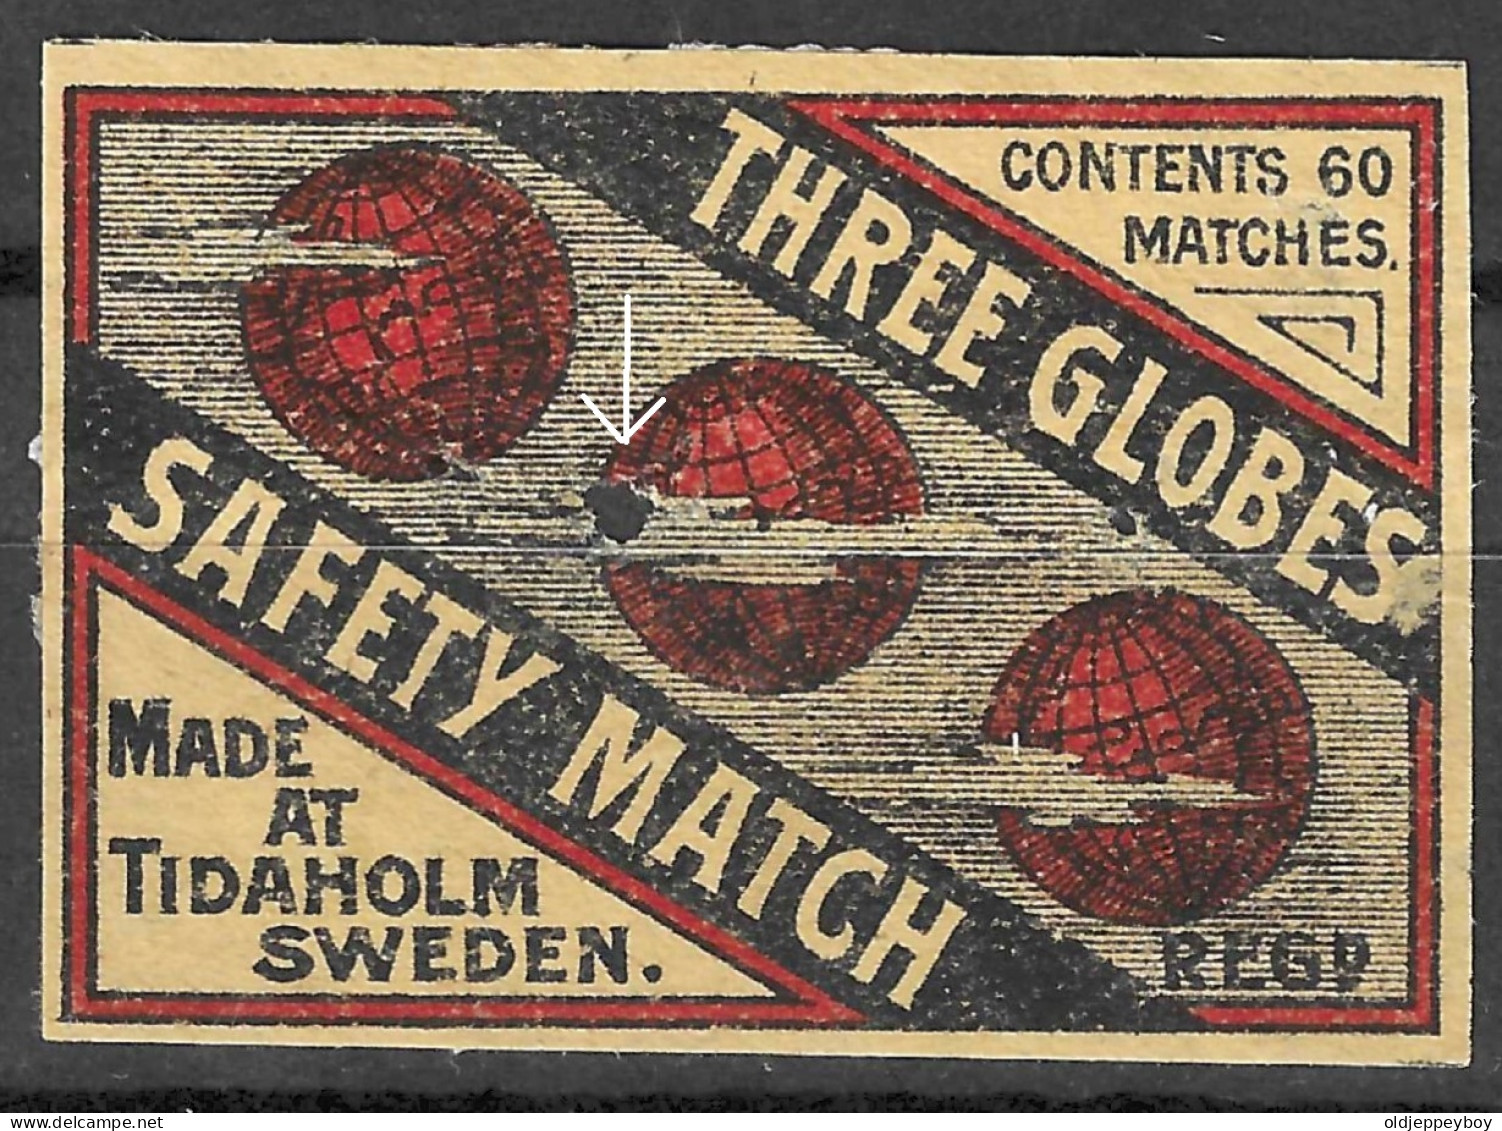  MADE  IN TIDAHOLM SWEDEN VINTAGE Phillumeny MATCHBOX LABEL THREE GLOBES  5  X 3.5 CM  SMALL HOLE AS INDICATED IN SCAN - Matchbox Labels